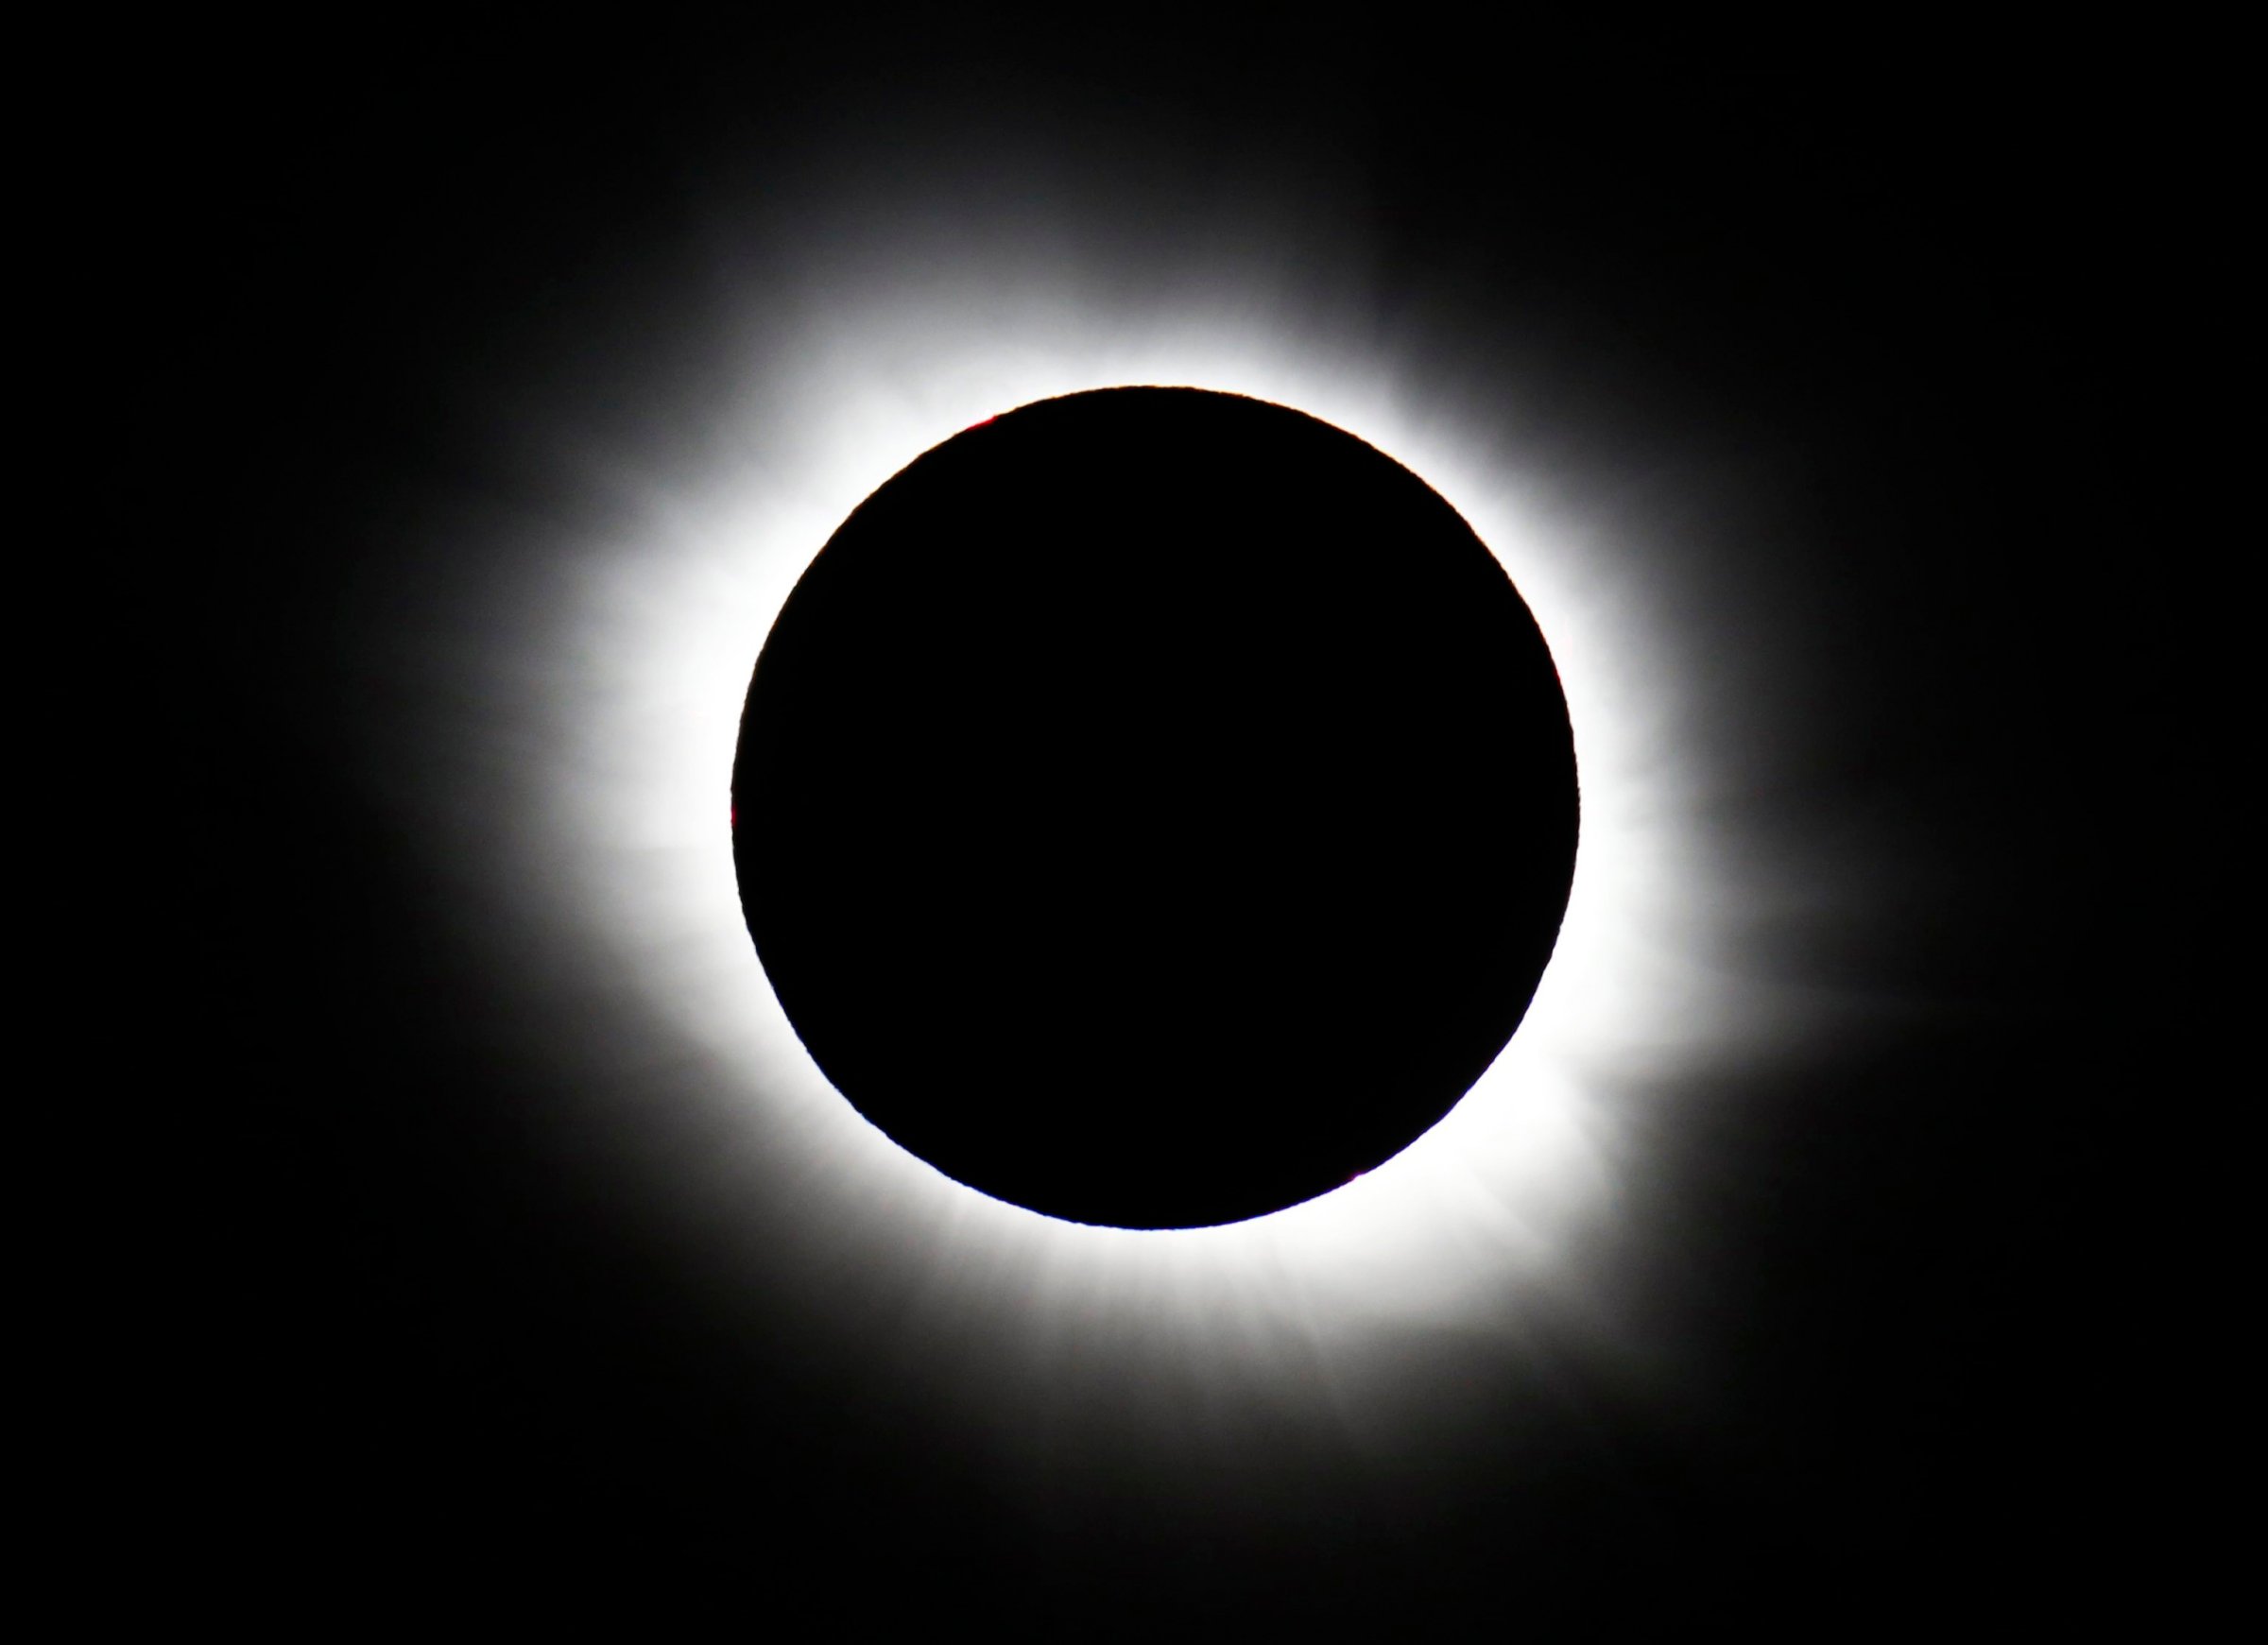 The total solar eclipse seen from Svalbard, Norway on March 20, 2015.